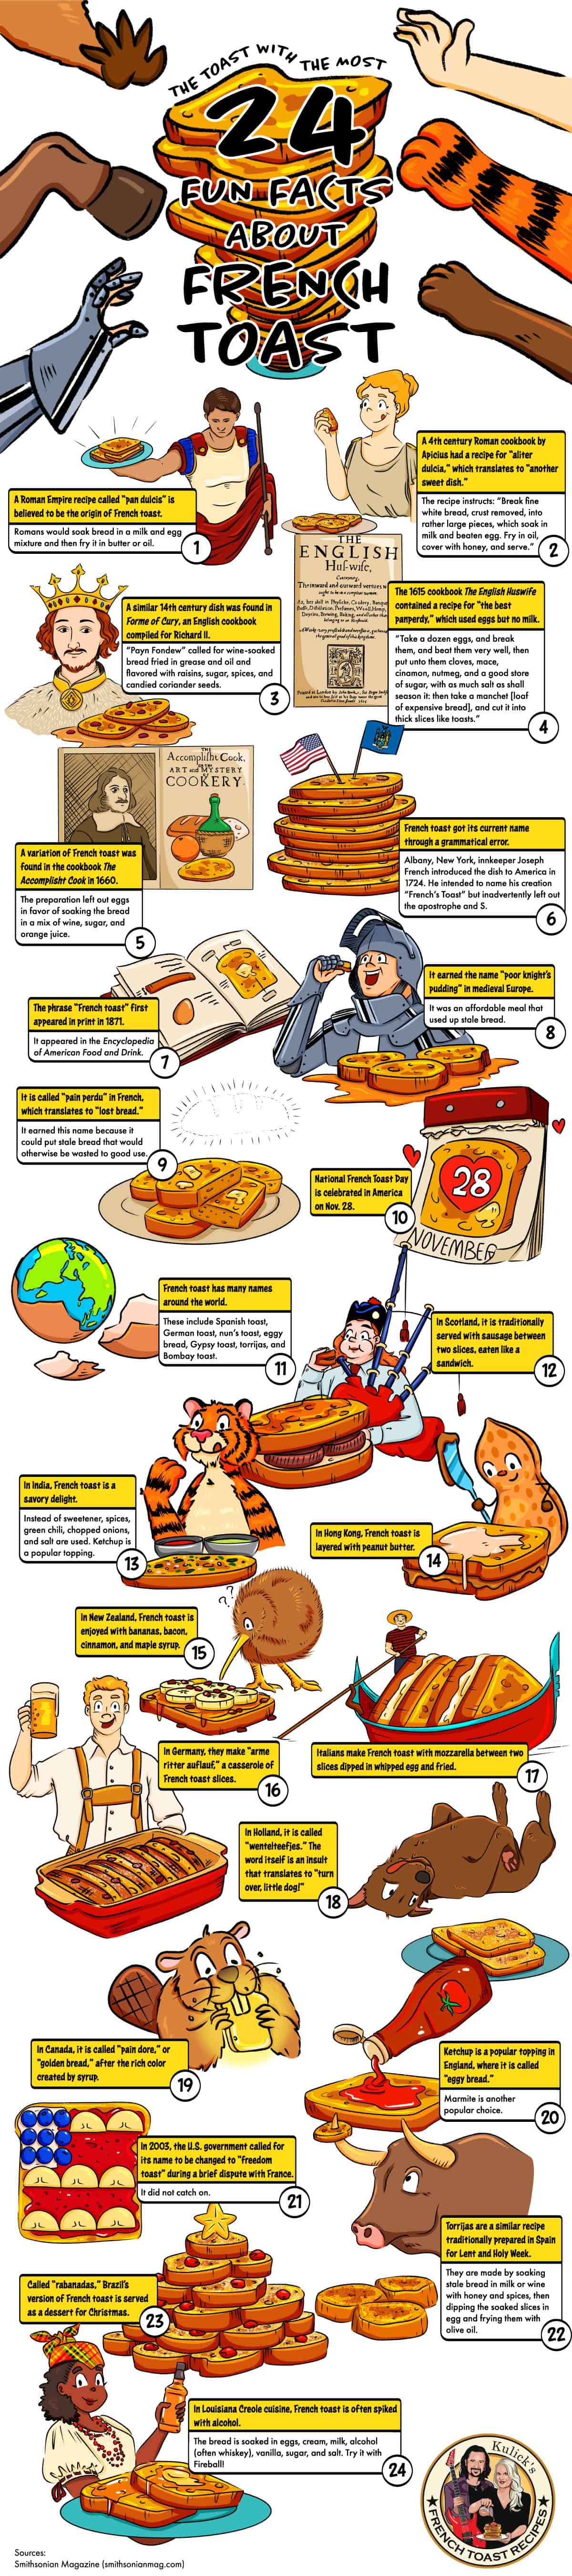 fun-facts-about-french-toast-2